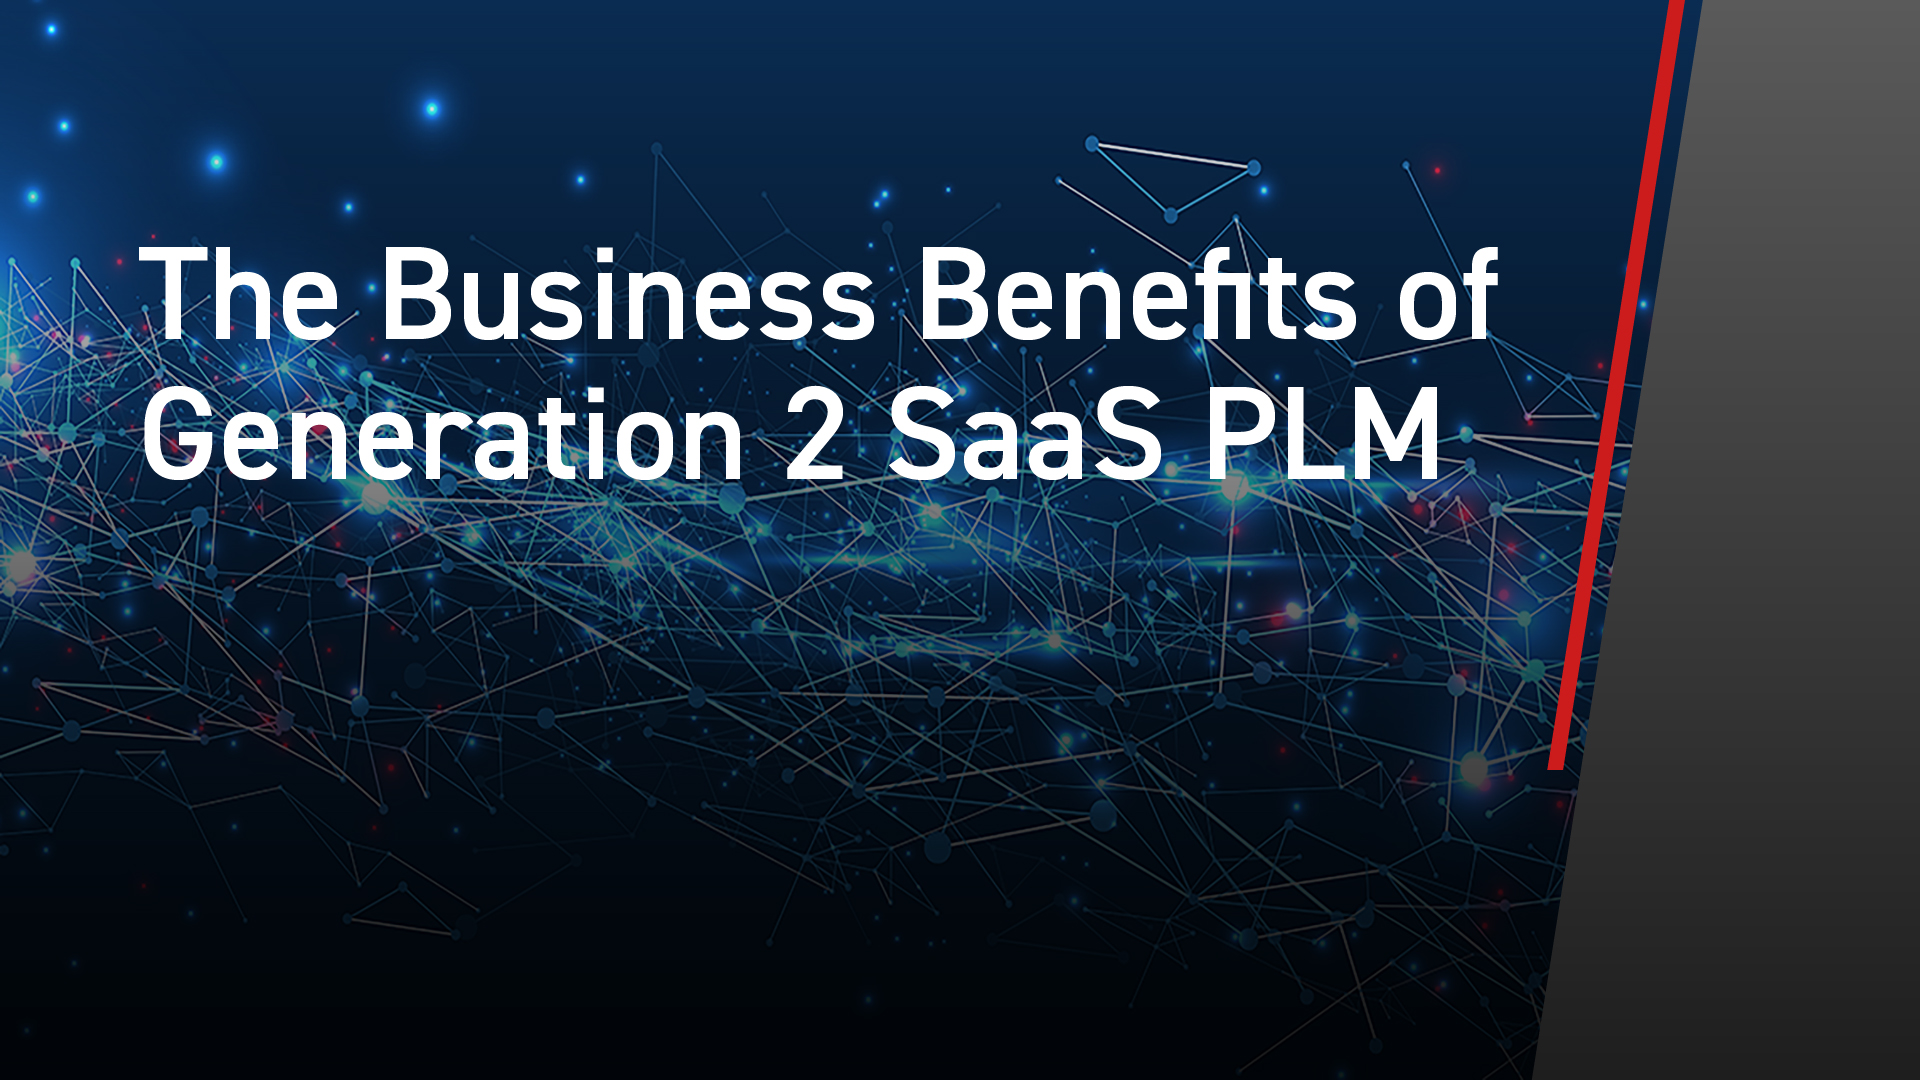 The Business Benefits of Generation 2 SaaS PLM